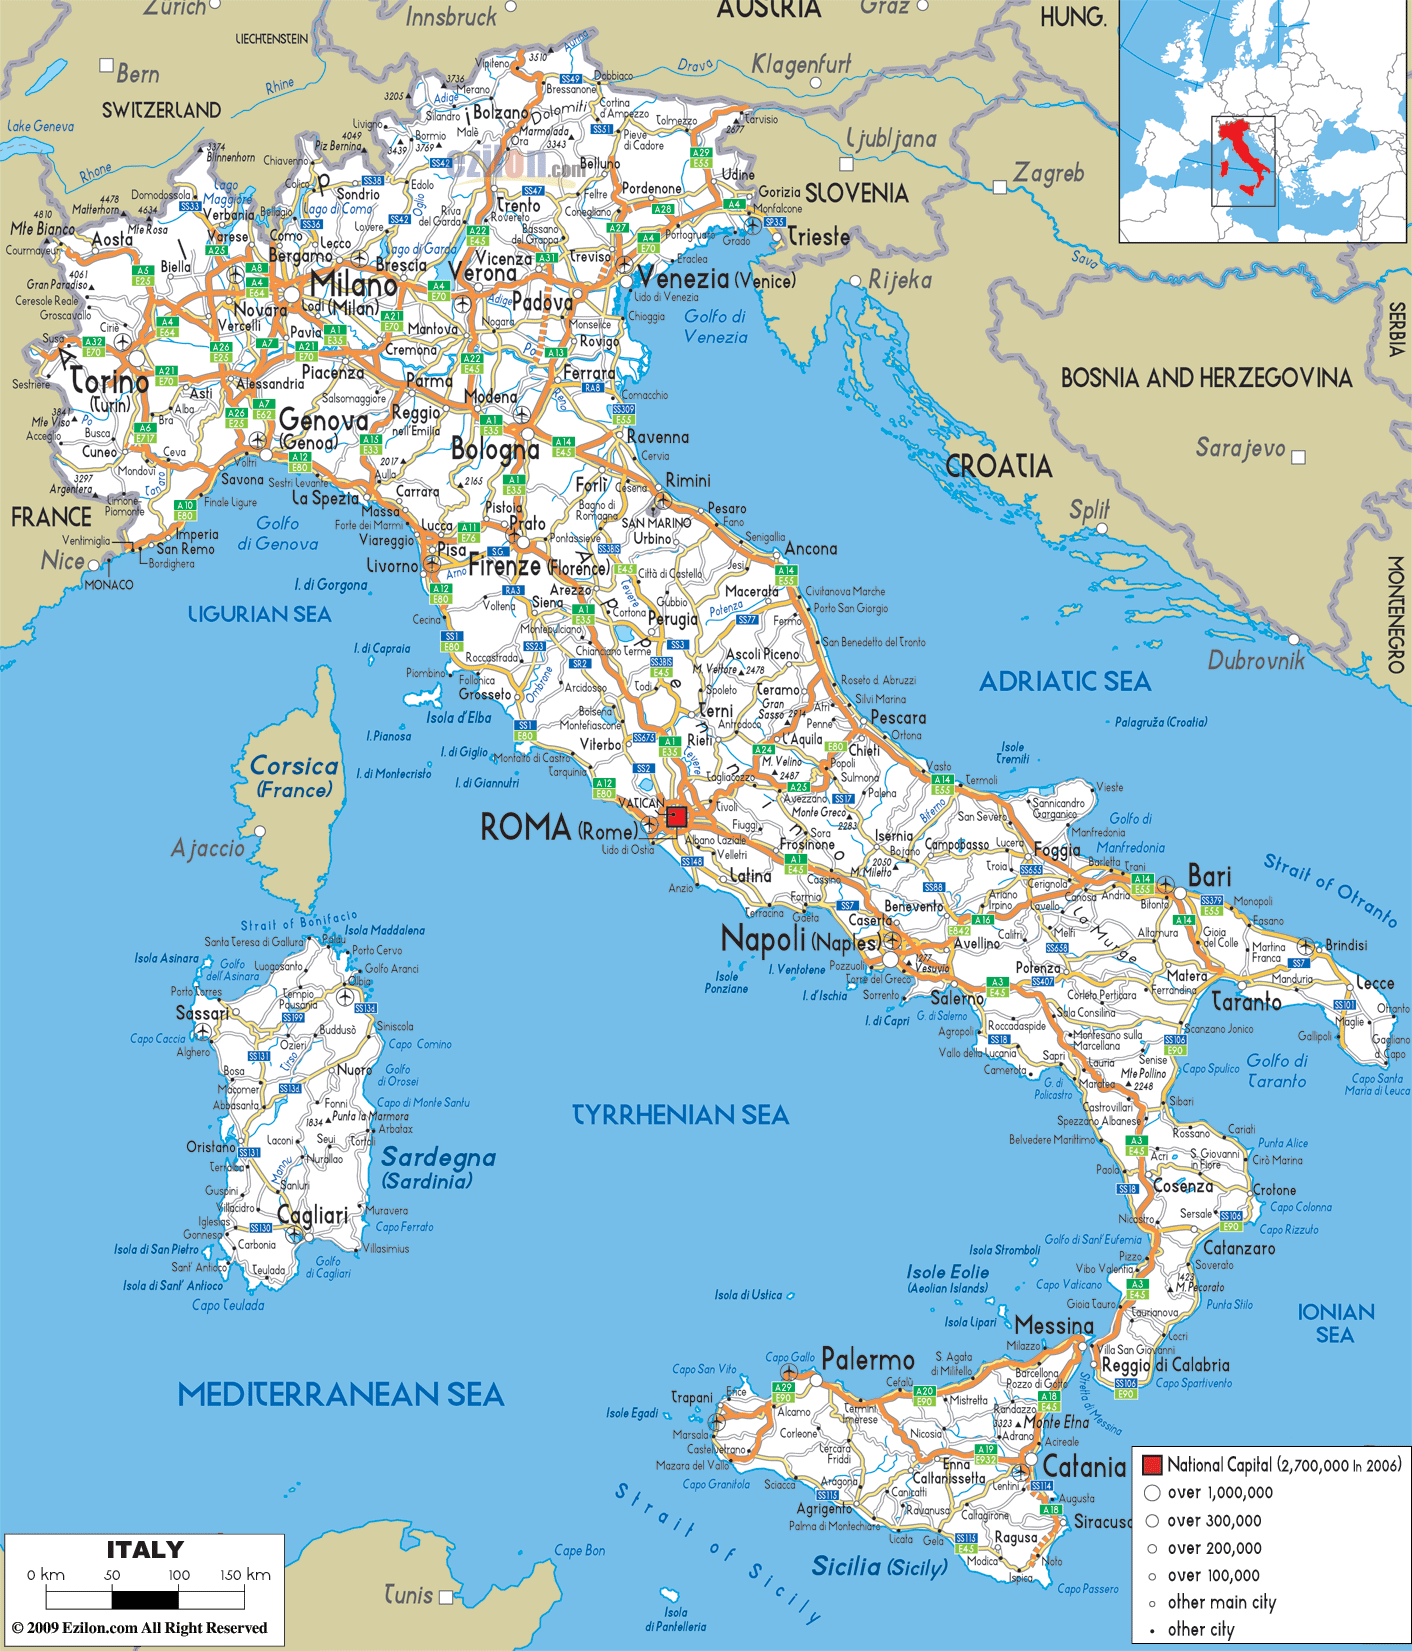 MAP OF ITALY - printable photo